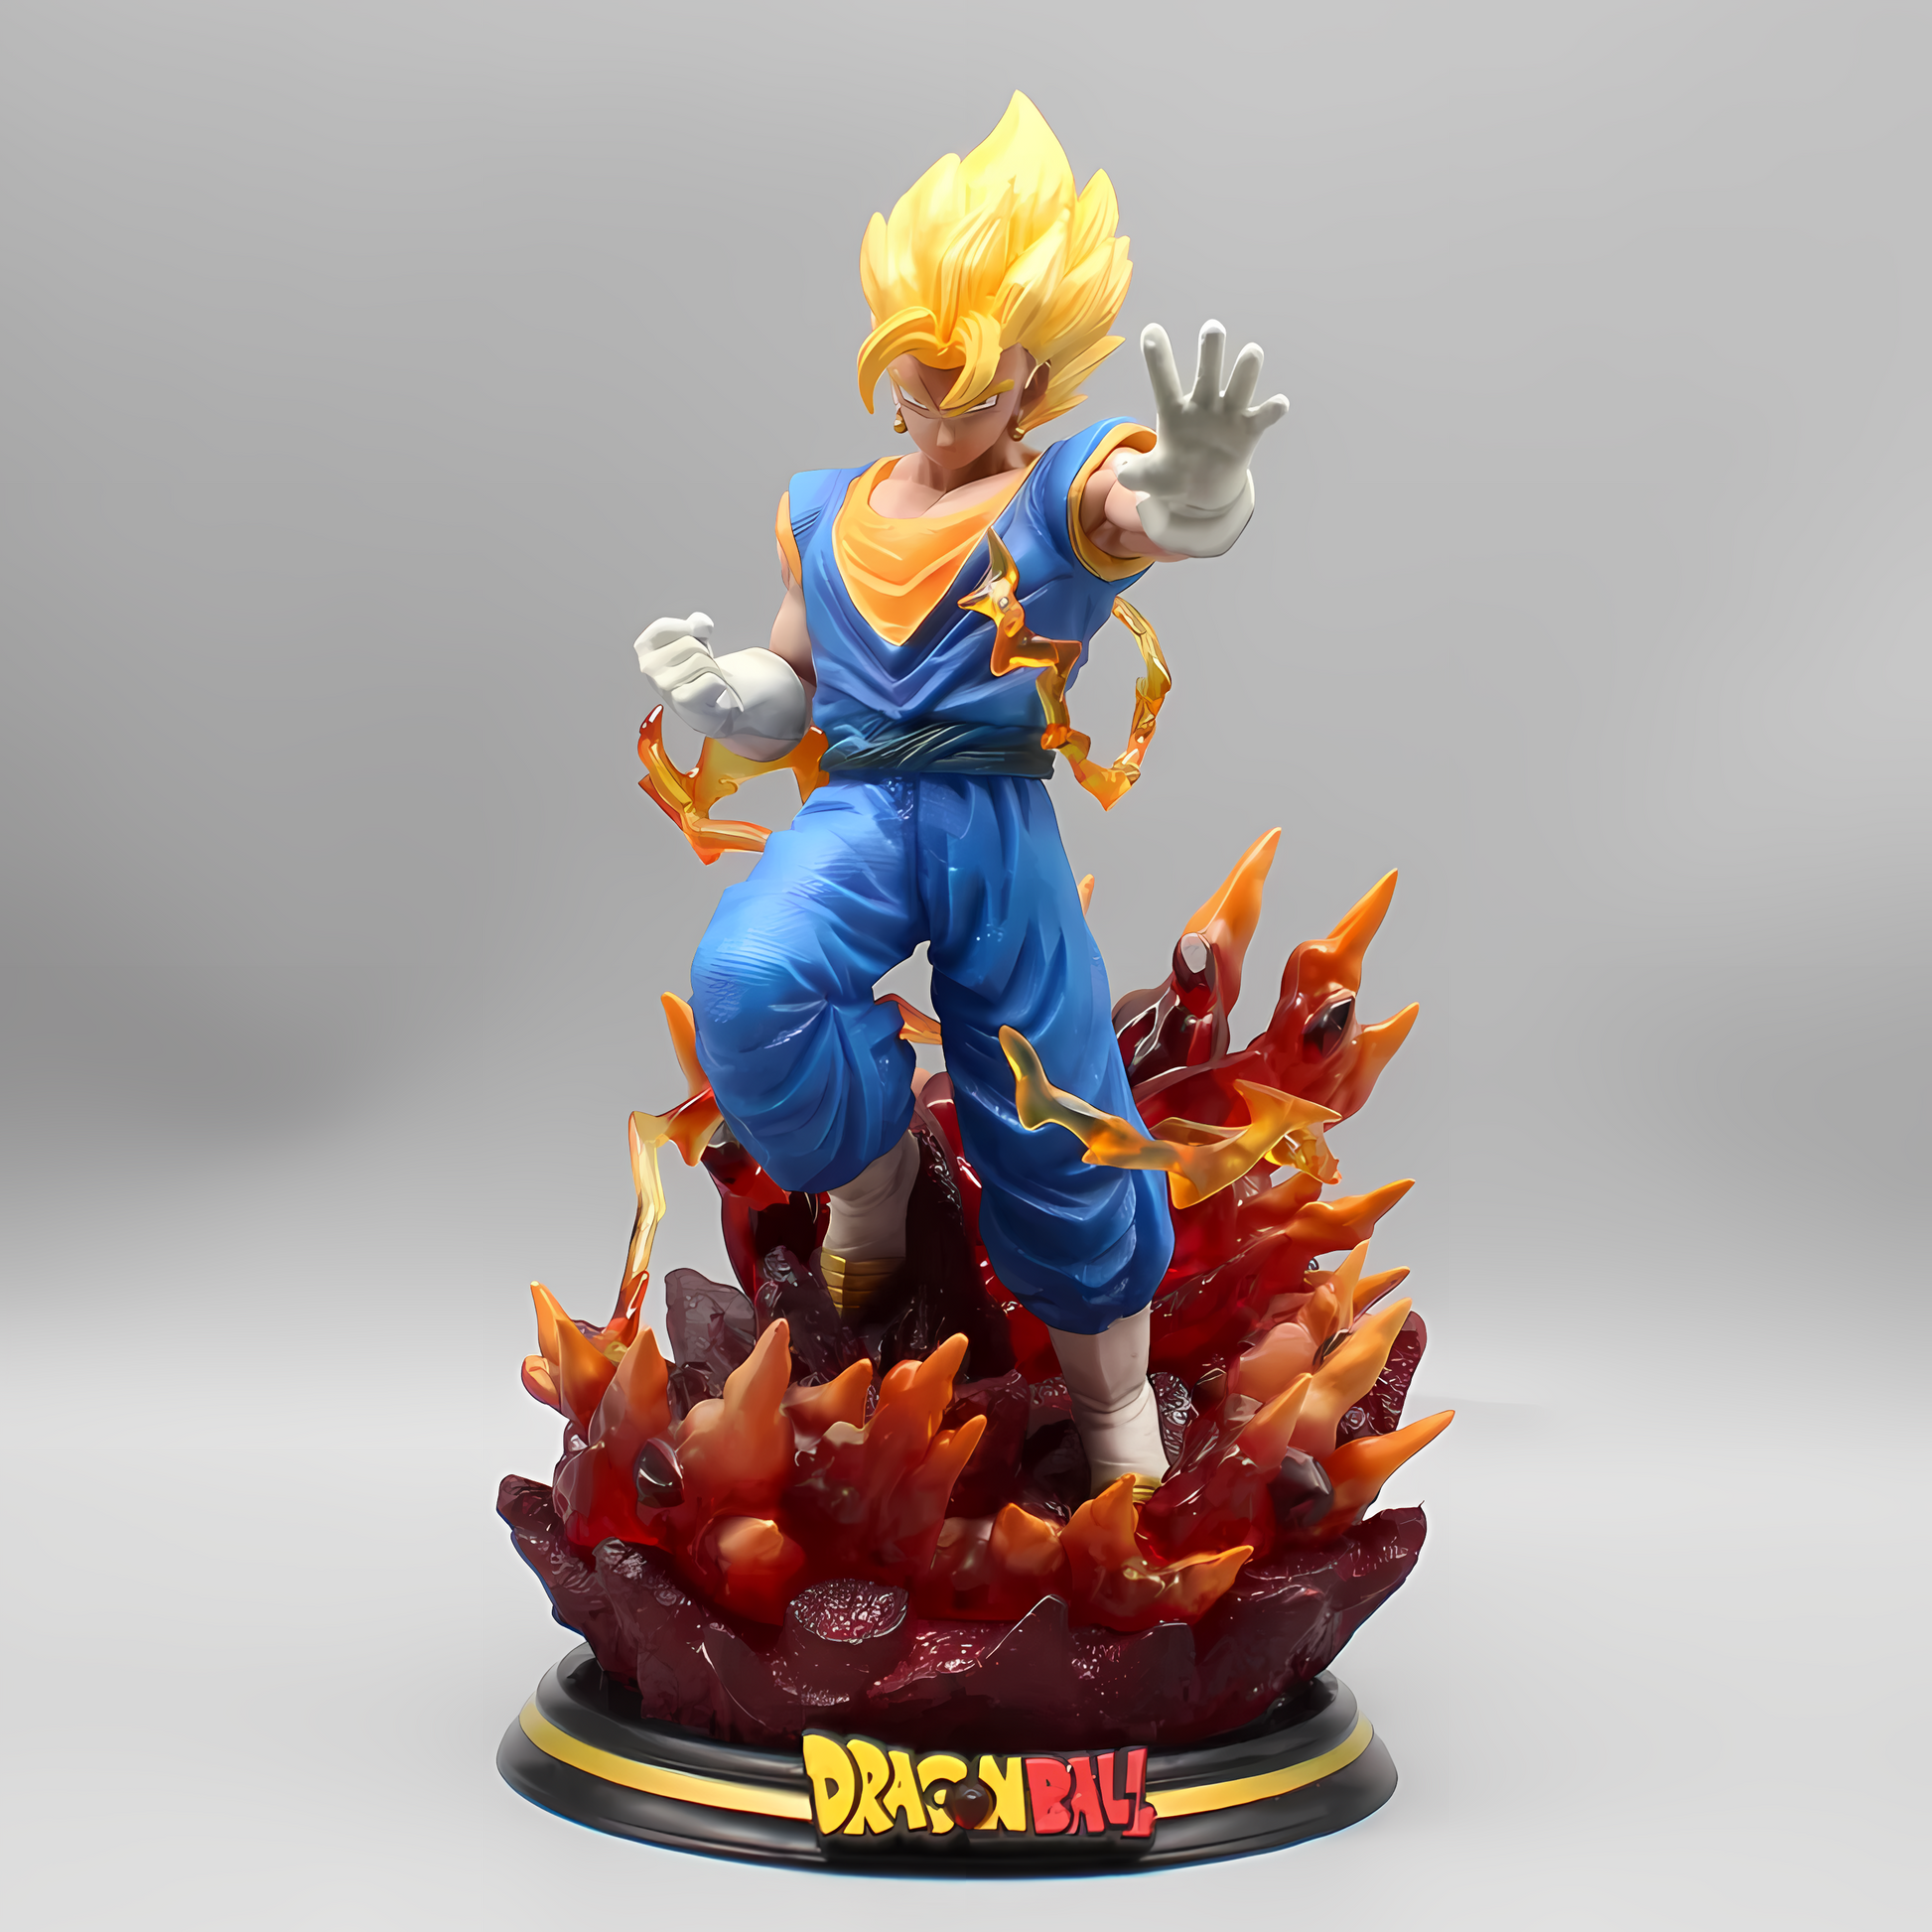 Vegetto Dragon Ball figure in a heroic stance on a flaming base, his Super Saiyan hair glowing, presented against a neutral background to highlight the fiery effects.